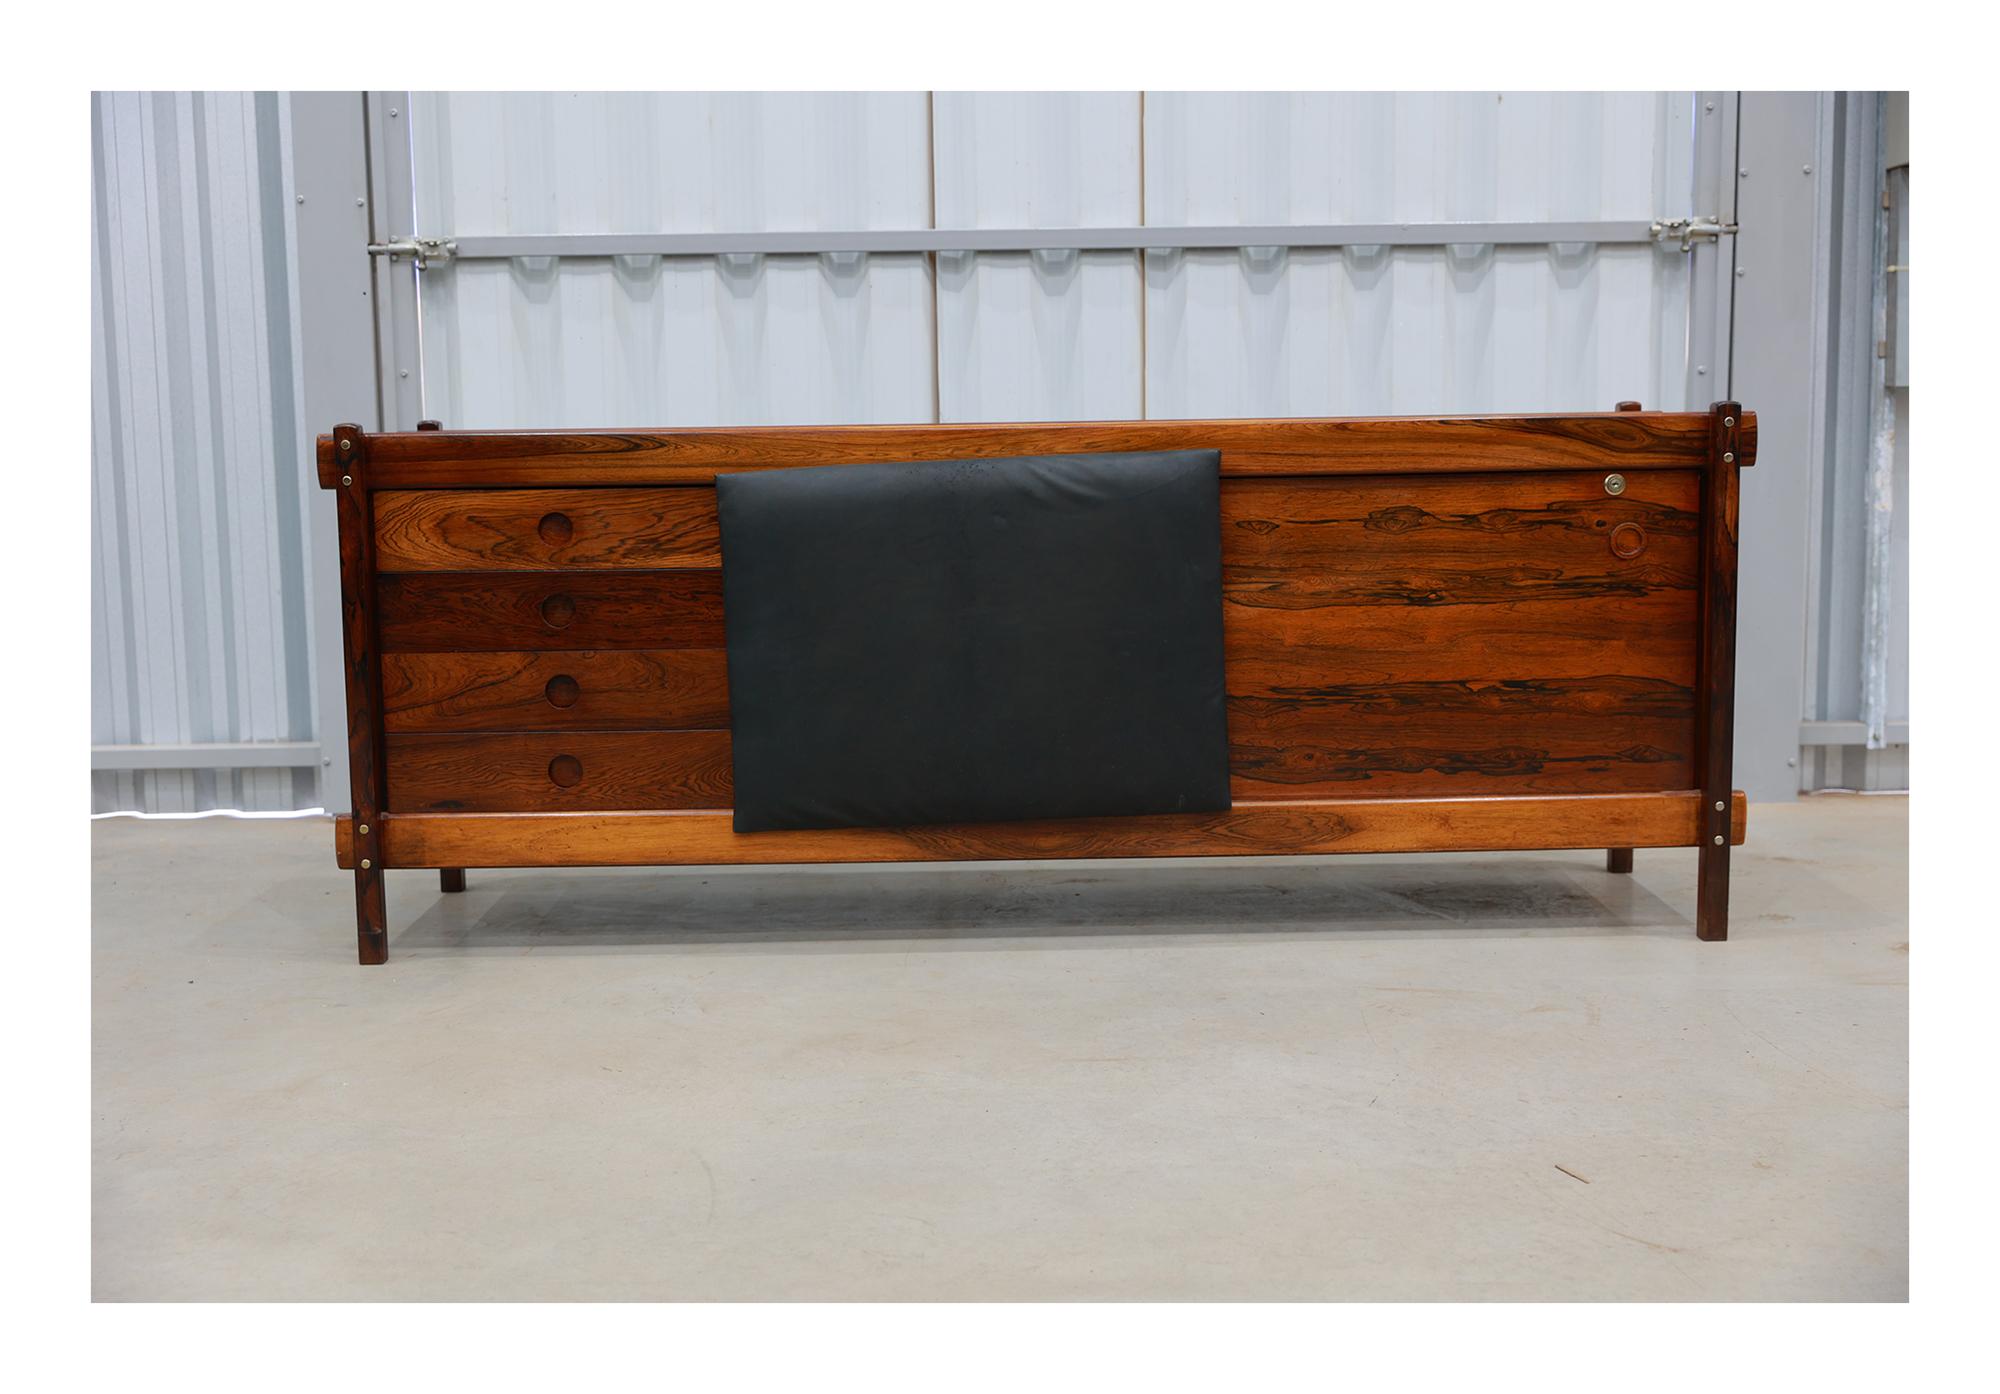 Available today, this Mid Century Modern Credenza “Adolpho” in hardwood by Sergio Rodrigues is stunning!

This wonderful credenza is made in solid Brazilian rosewood (Jacaranda). The sliding door is still upholstered in its original faux leather.